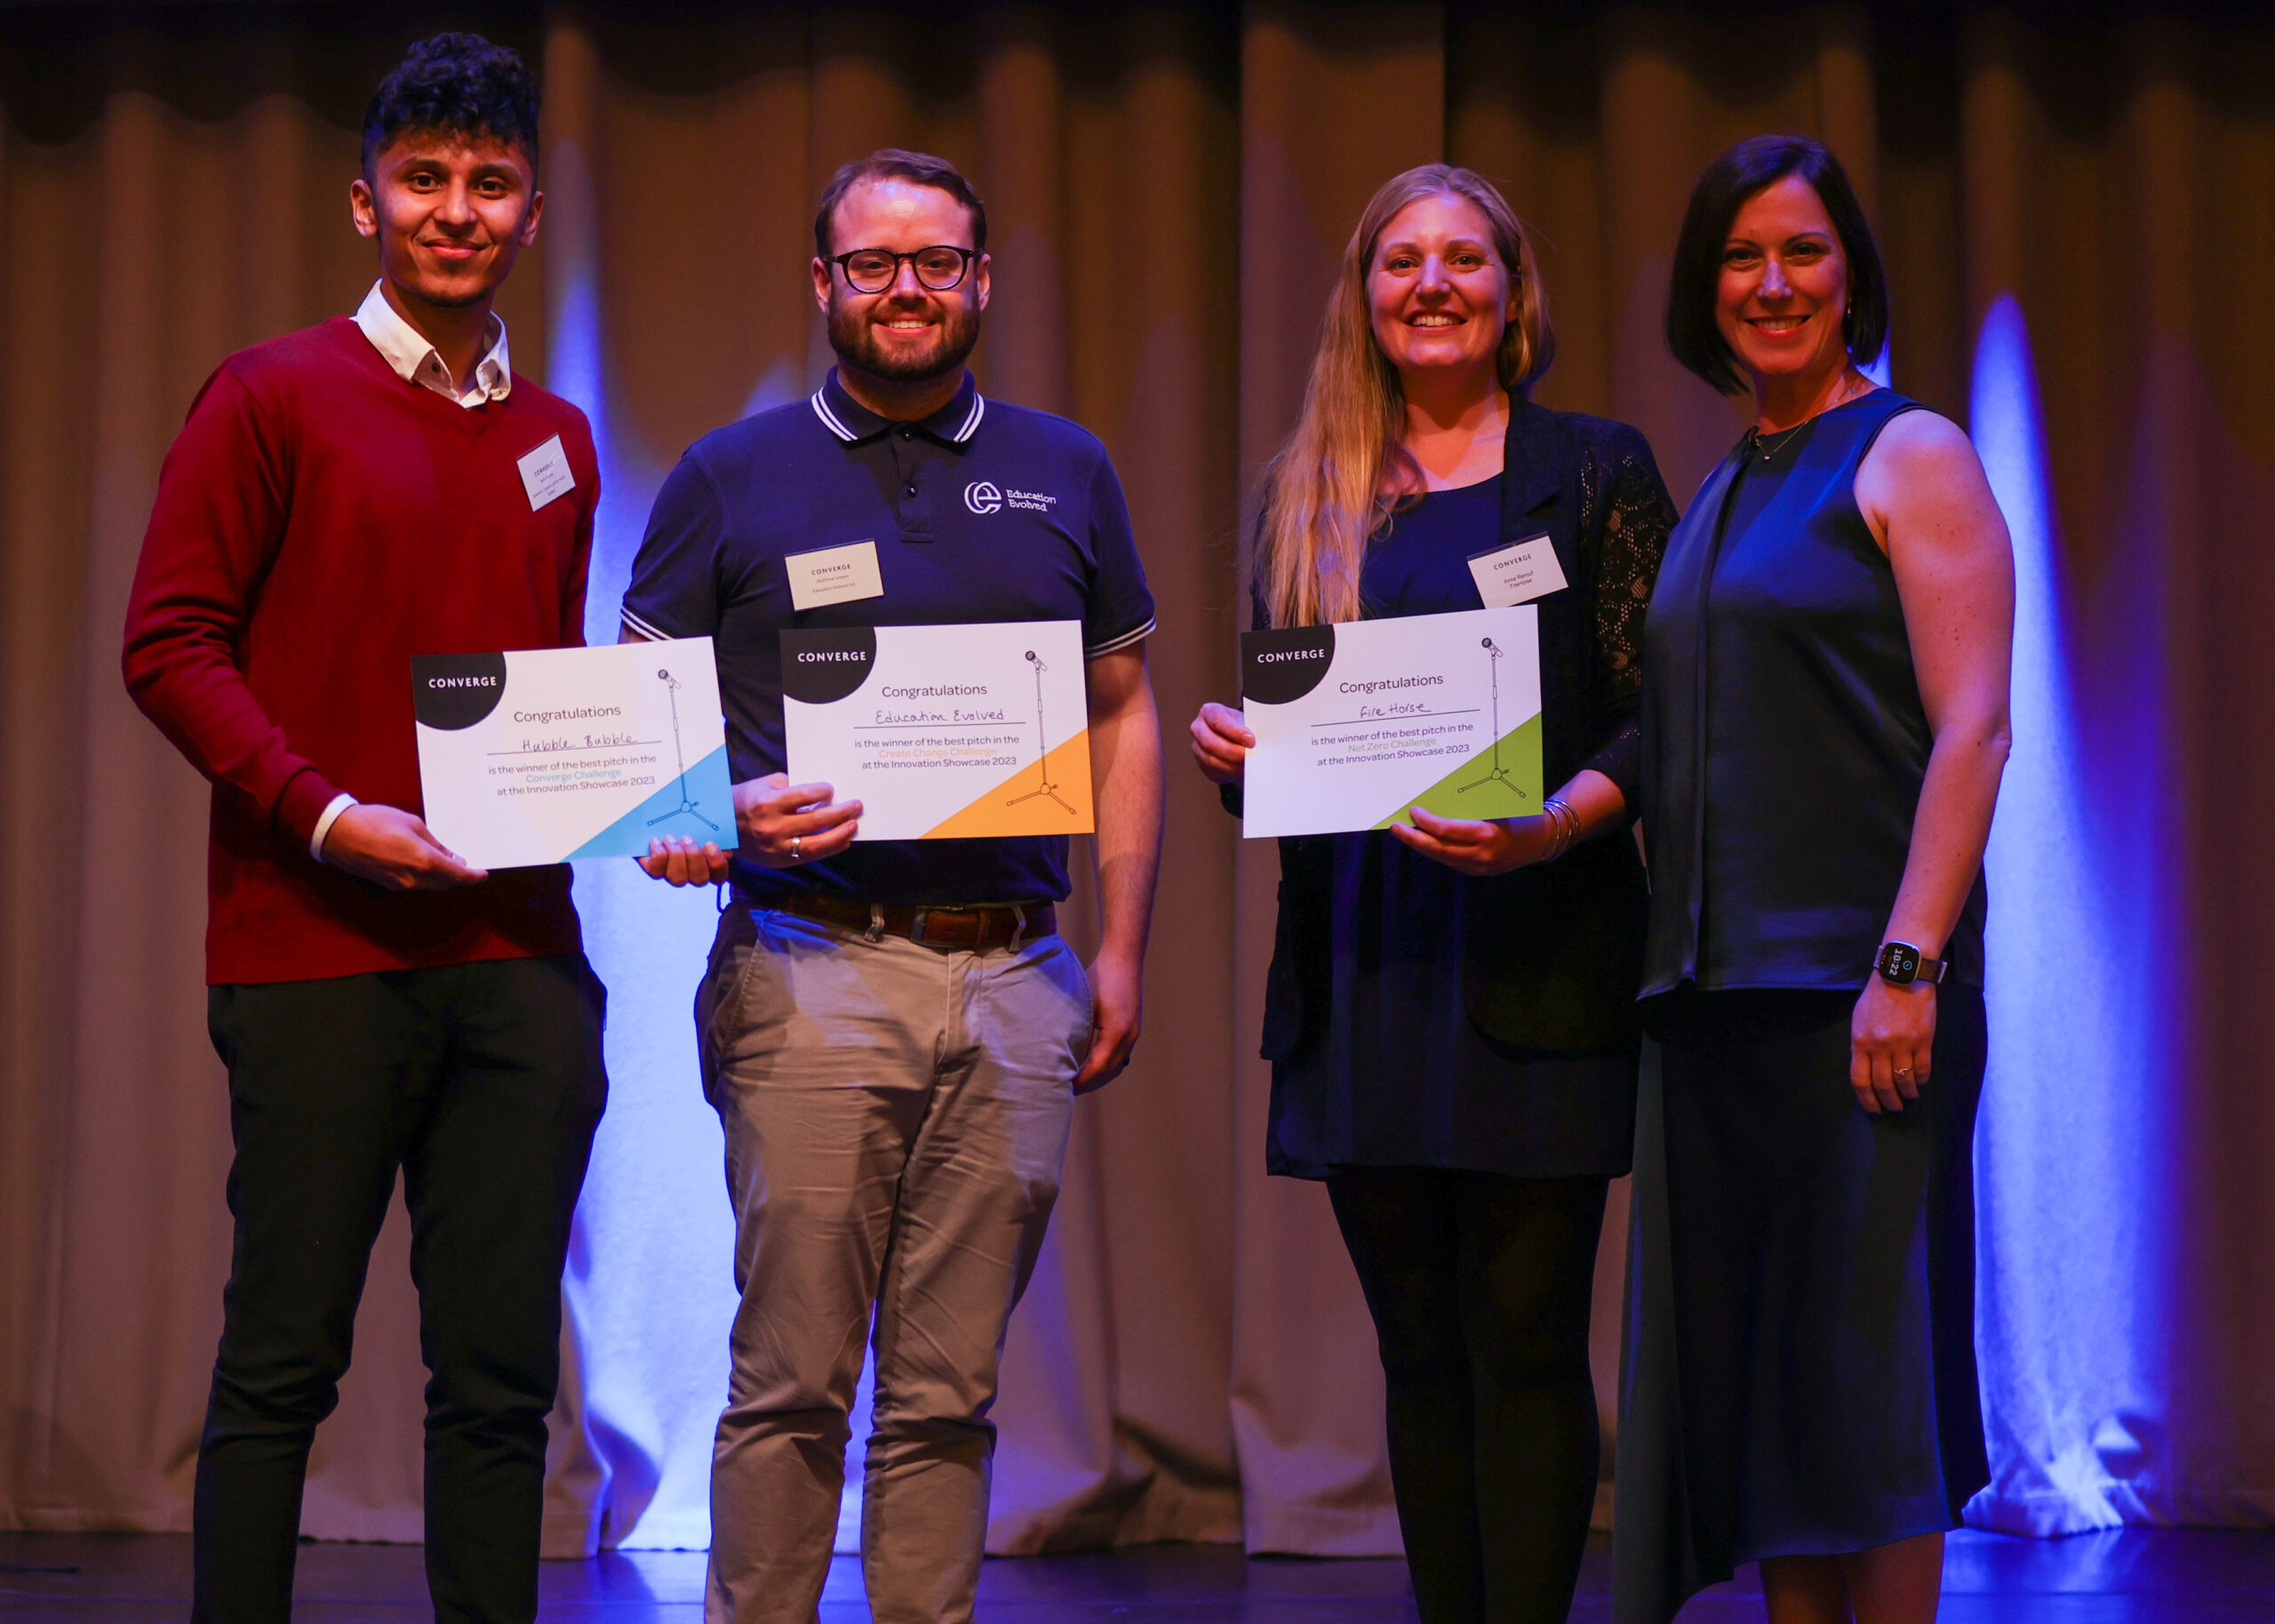 From Left to Right: Matthew Jevin from the University of Dundee with Hubble Bubble; Matthew Leeper from the University of Glasgow with Education Evolved; Anna Renouf from SRUC with FireHorse and Claudia Cavalluzzo, Executive Director of Converge